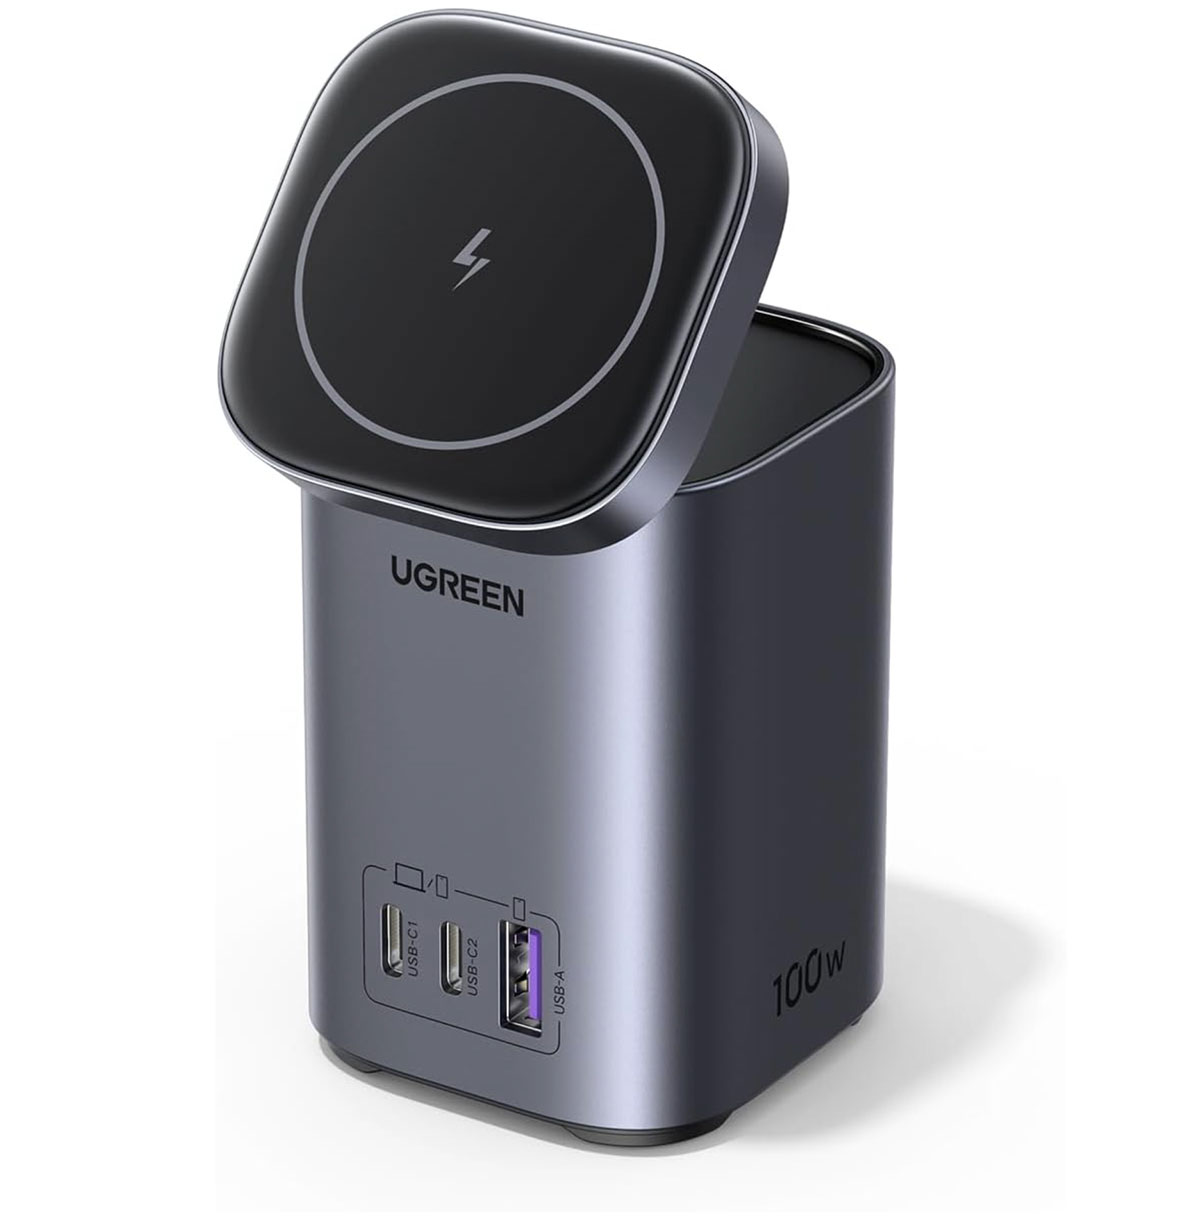 Smartphone Accessories: UGREEN 100W USB-C GaN Charger $64 (Save 20%), more